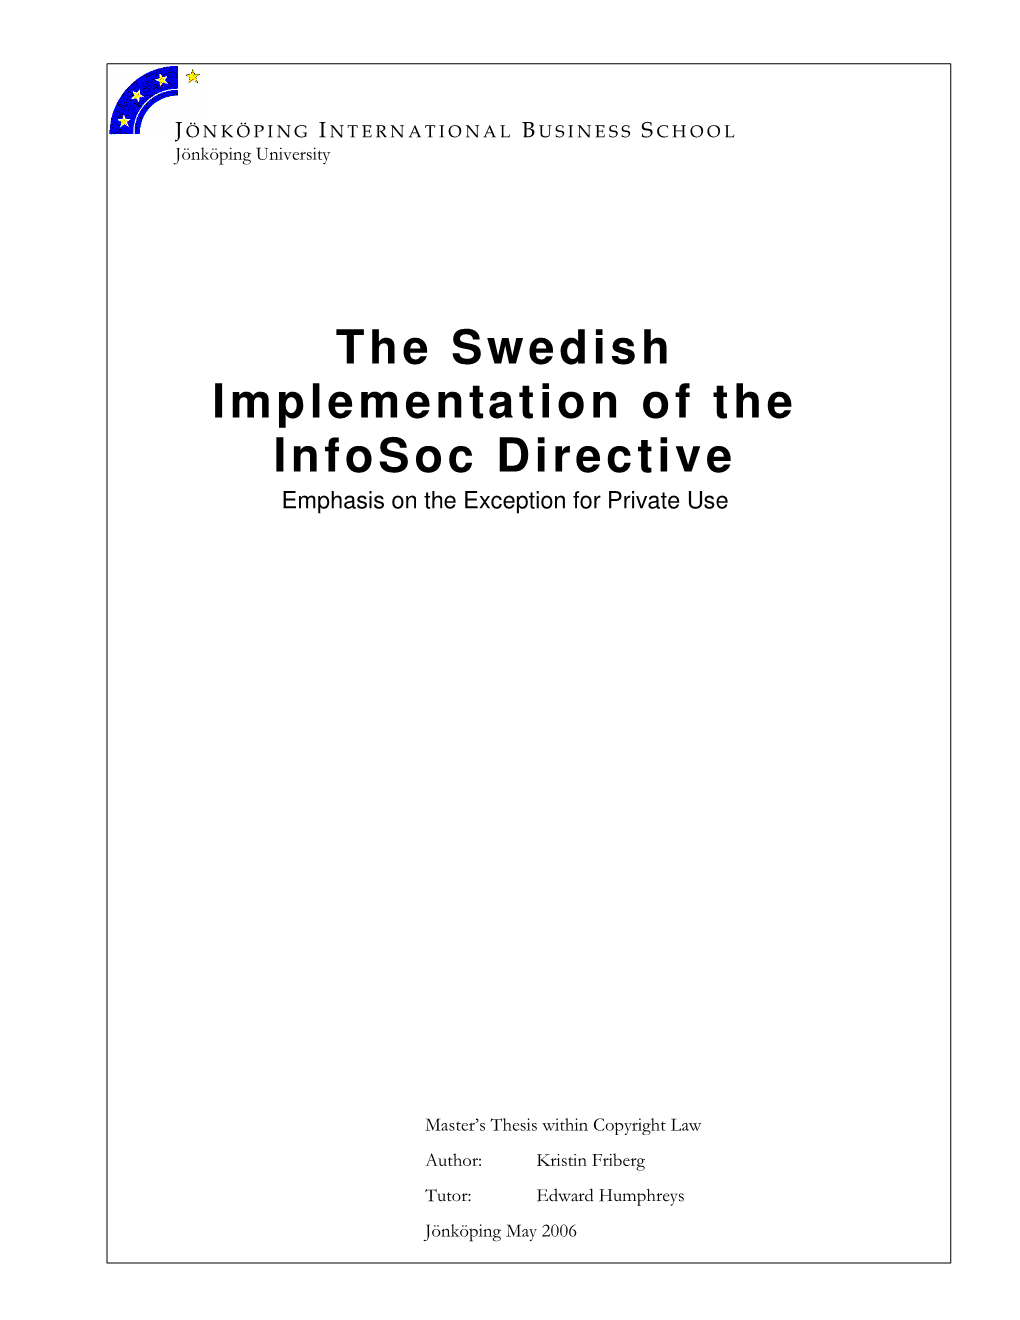 The Swedish Implementation of the Infosoc Directive Emphasis on the Exception for Private Use